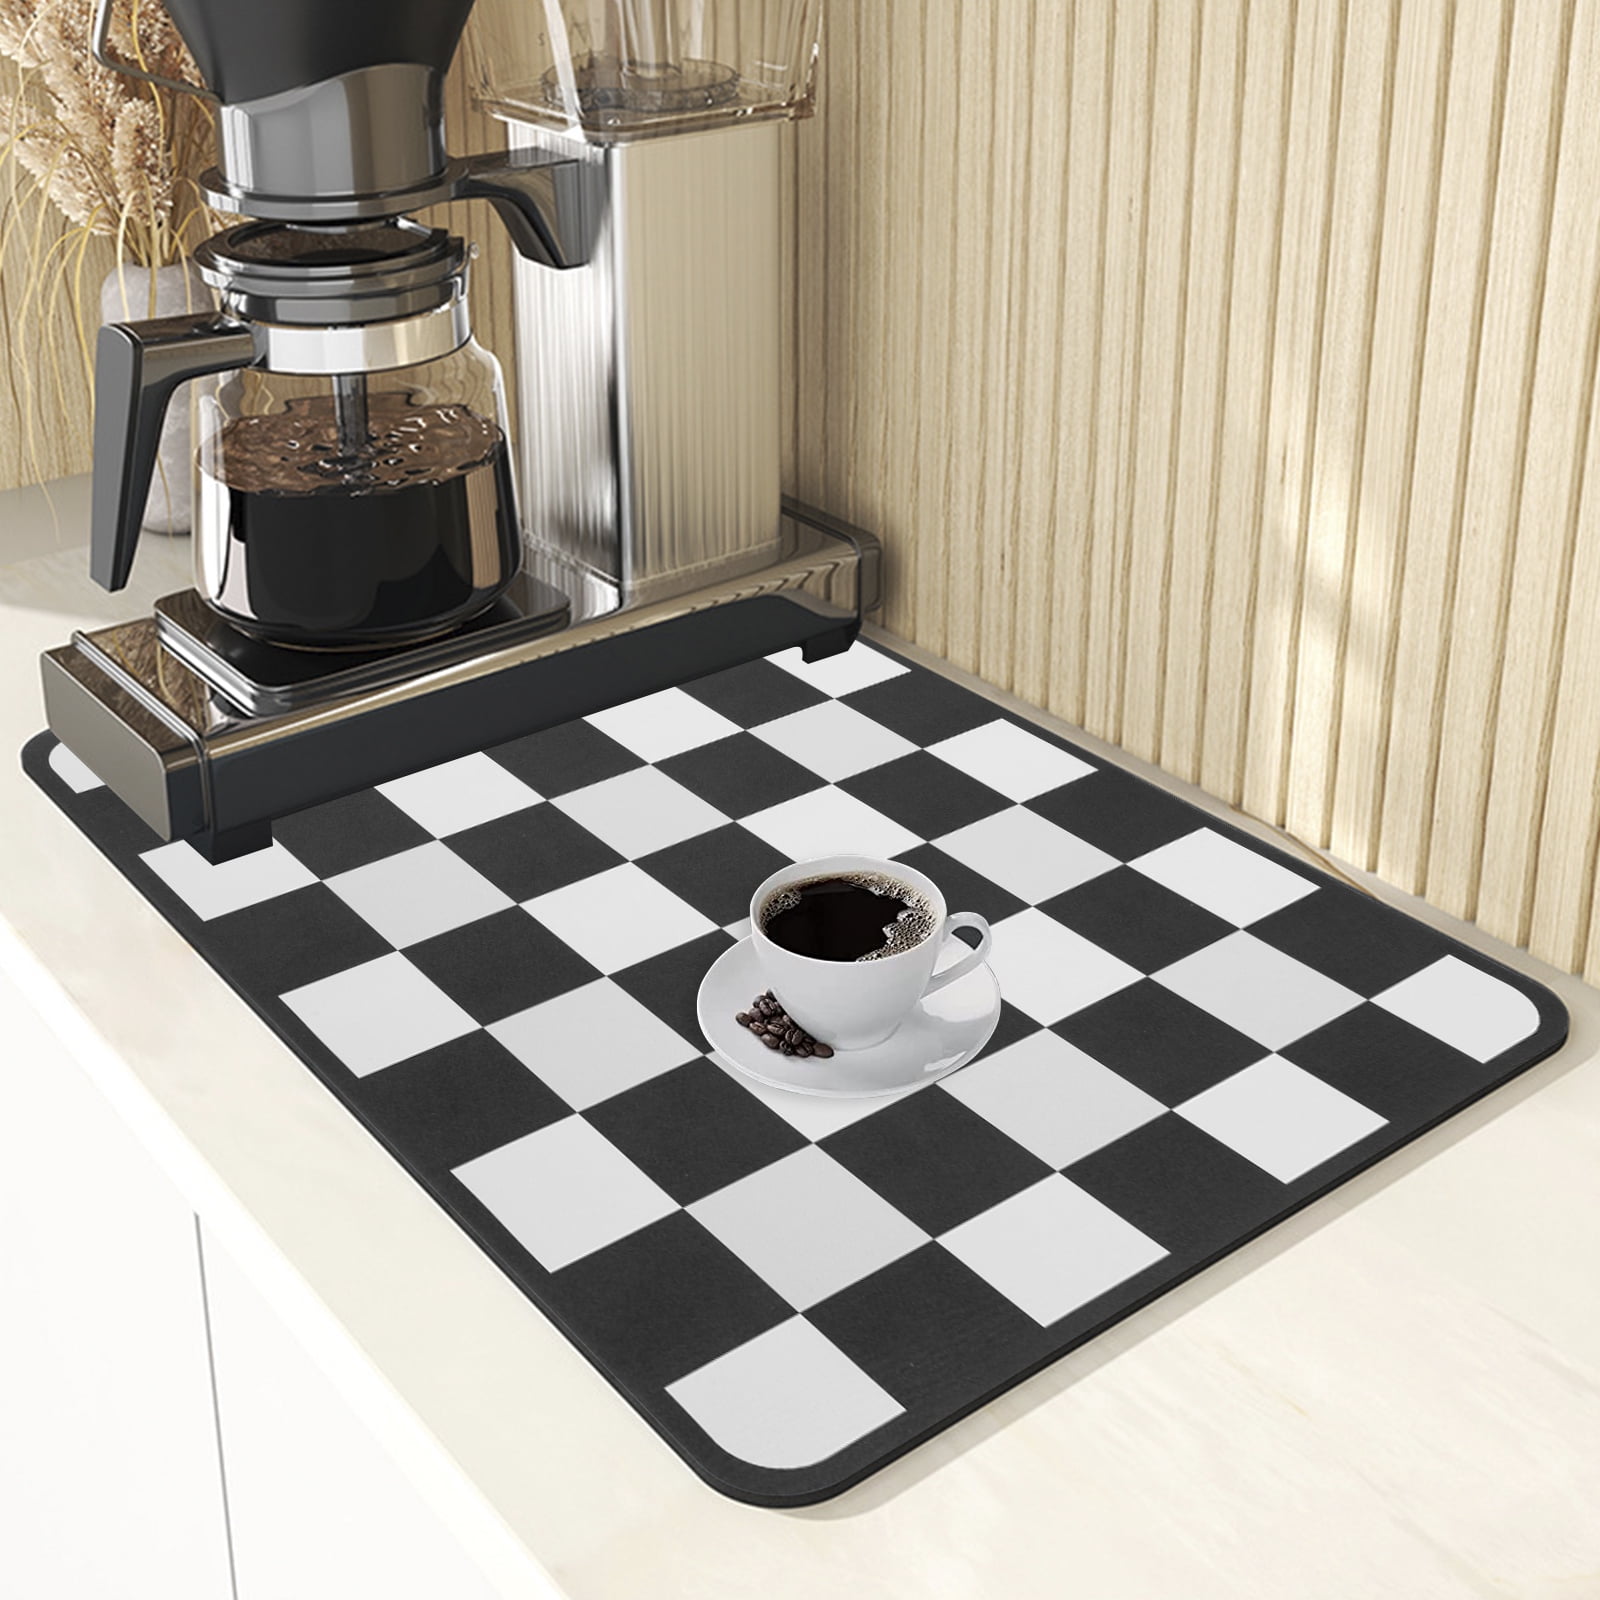 AMQTSLM Coffee Maker Mat for Countertops Fit for Keurig Coffee